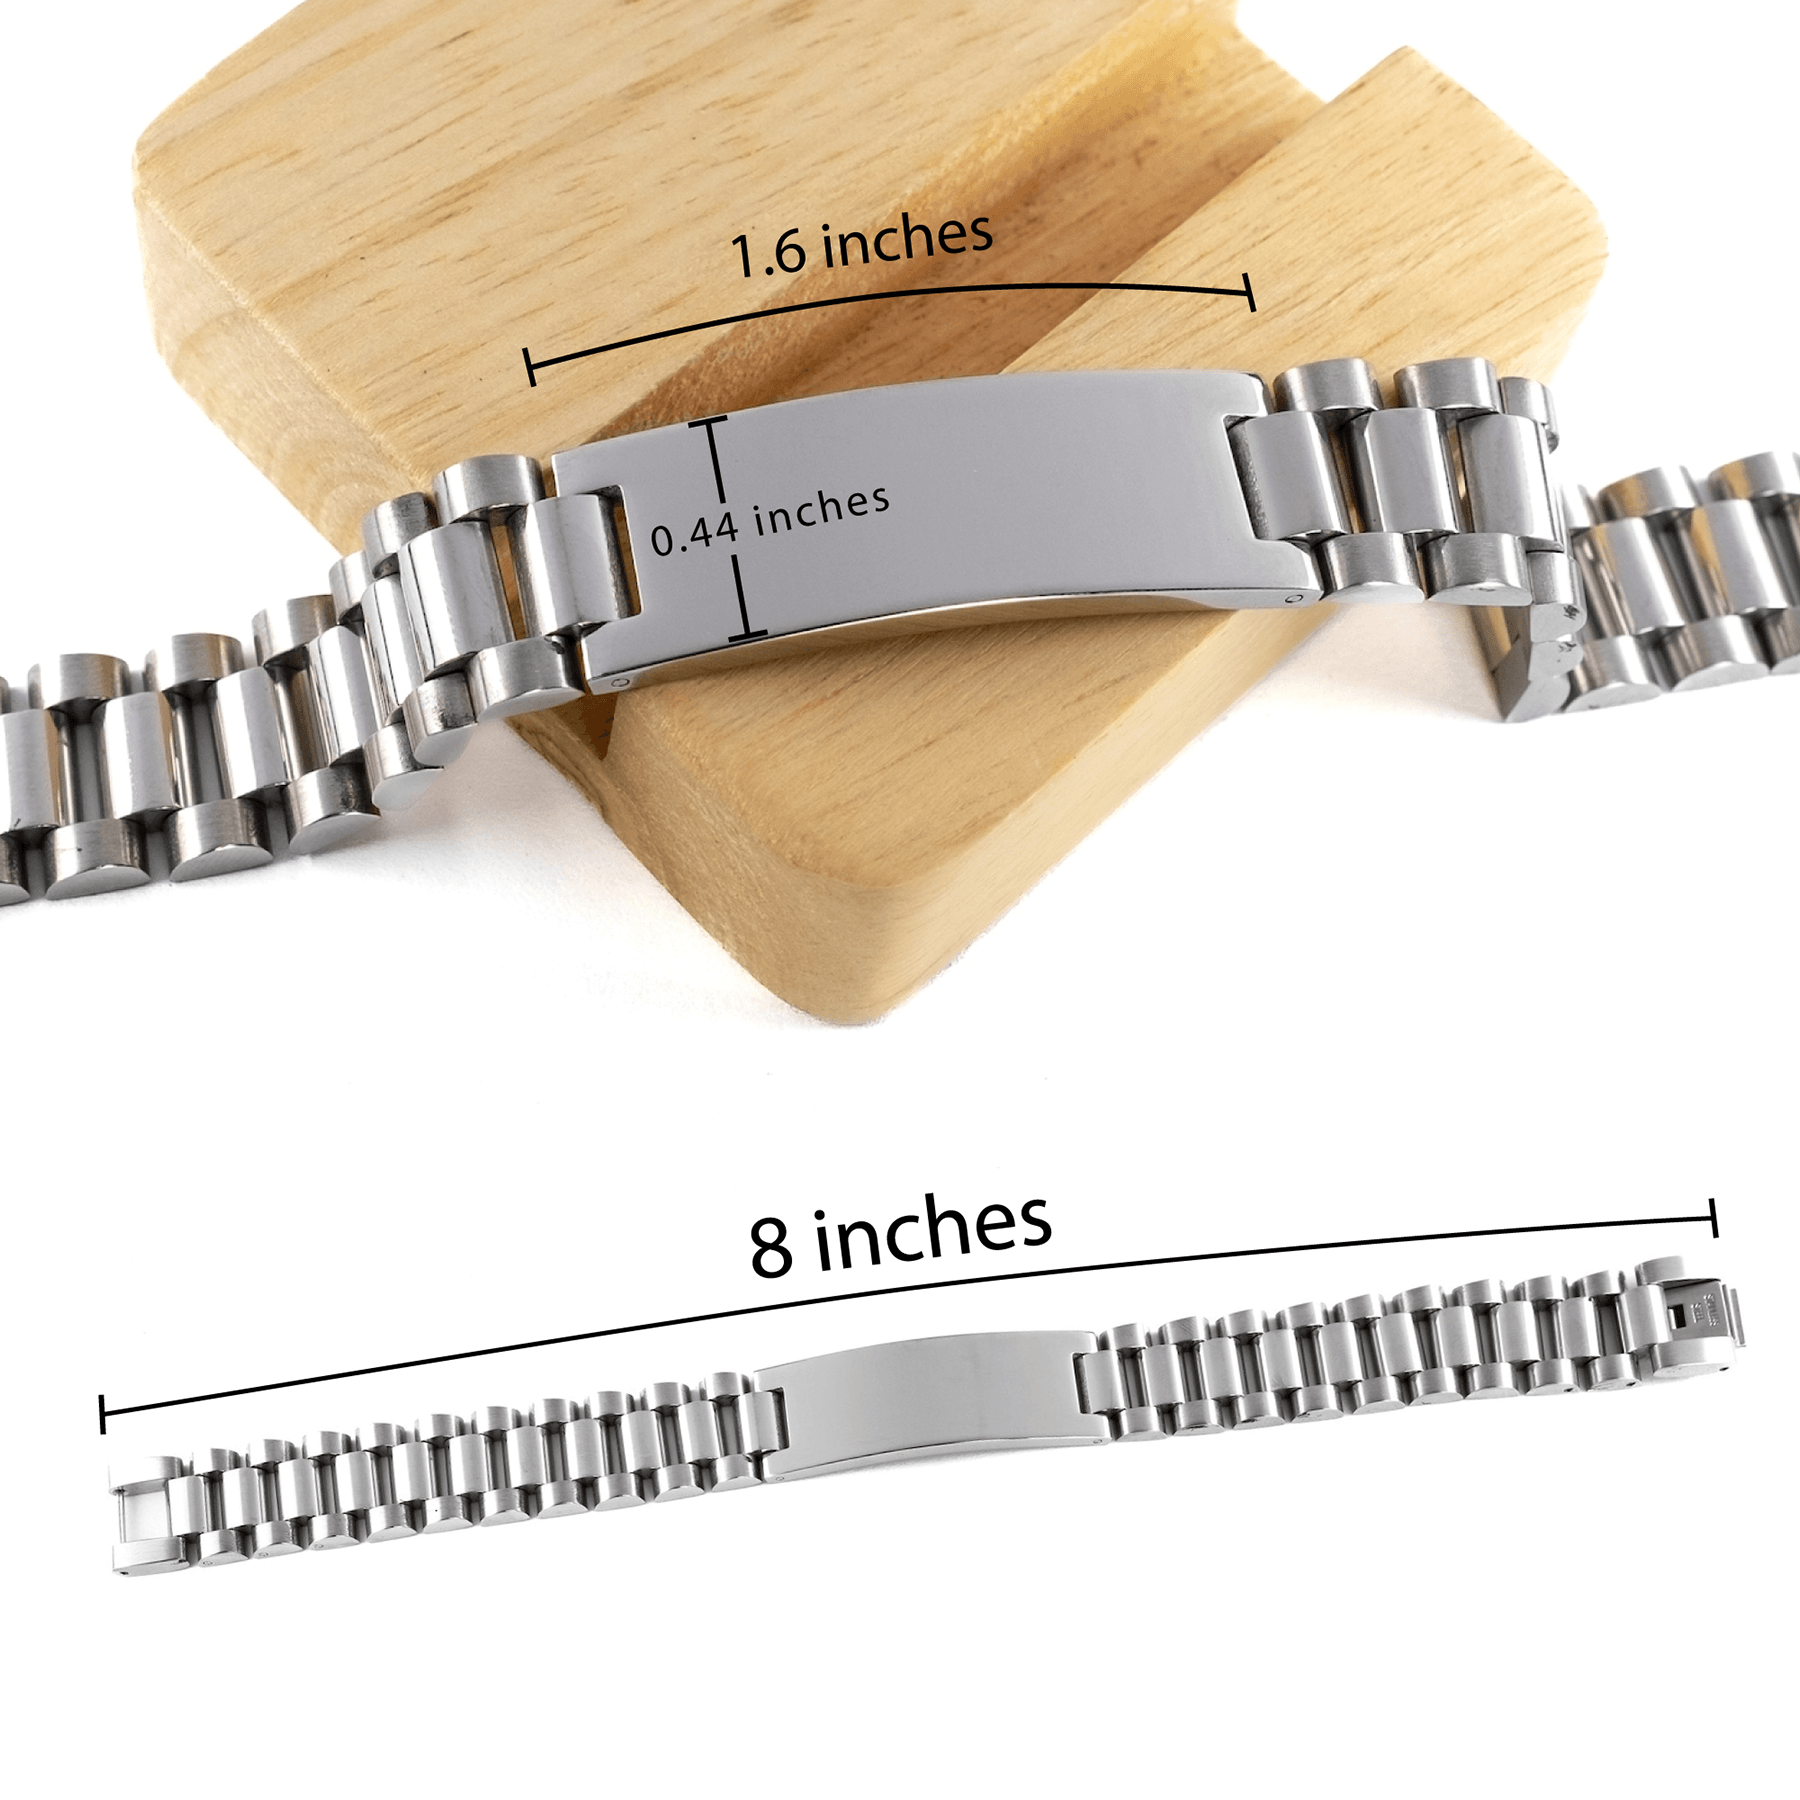 Heartfelt Soulmate Engraved Ladder Stainless Steel Bracelet - Life is Learning to Dance in the Rain, I'm always with you - Birthday, Christmas Holiday Gifts - Mallard Moon Gift Shop